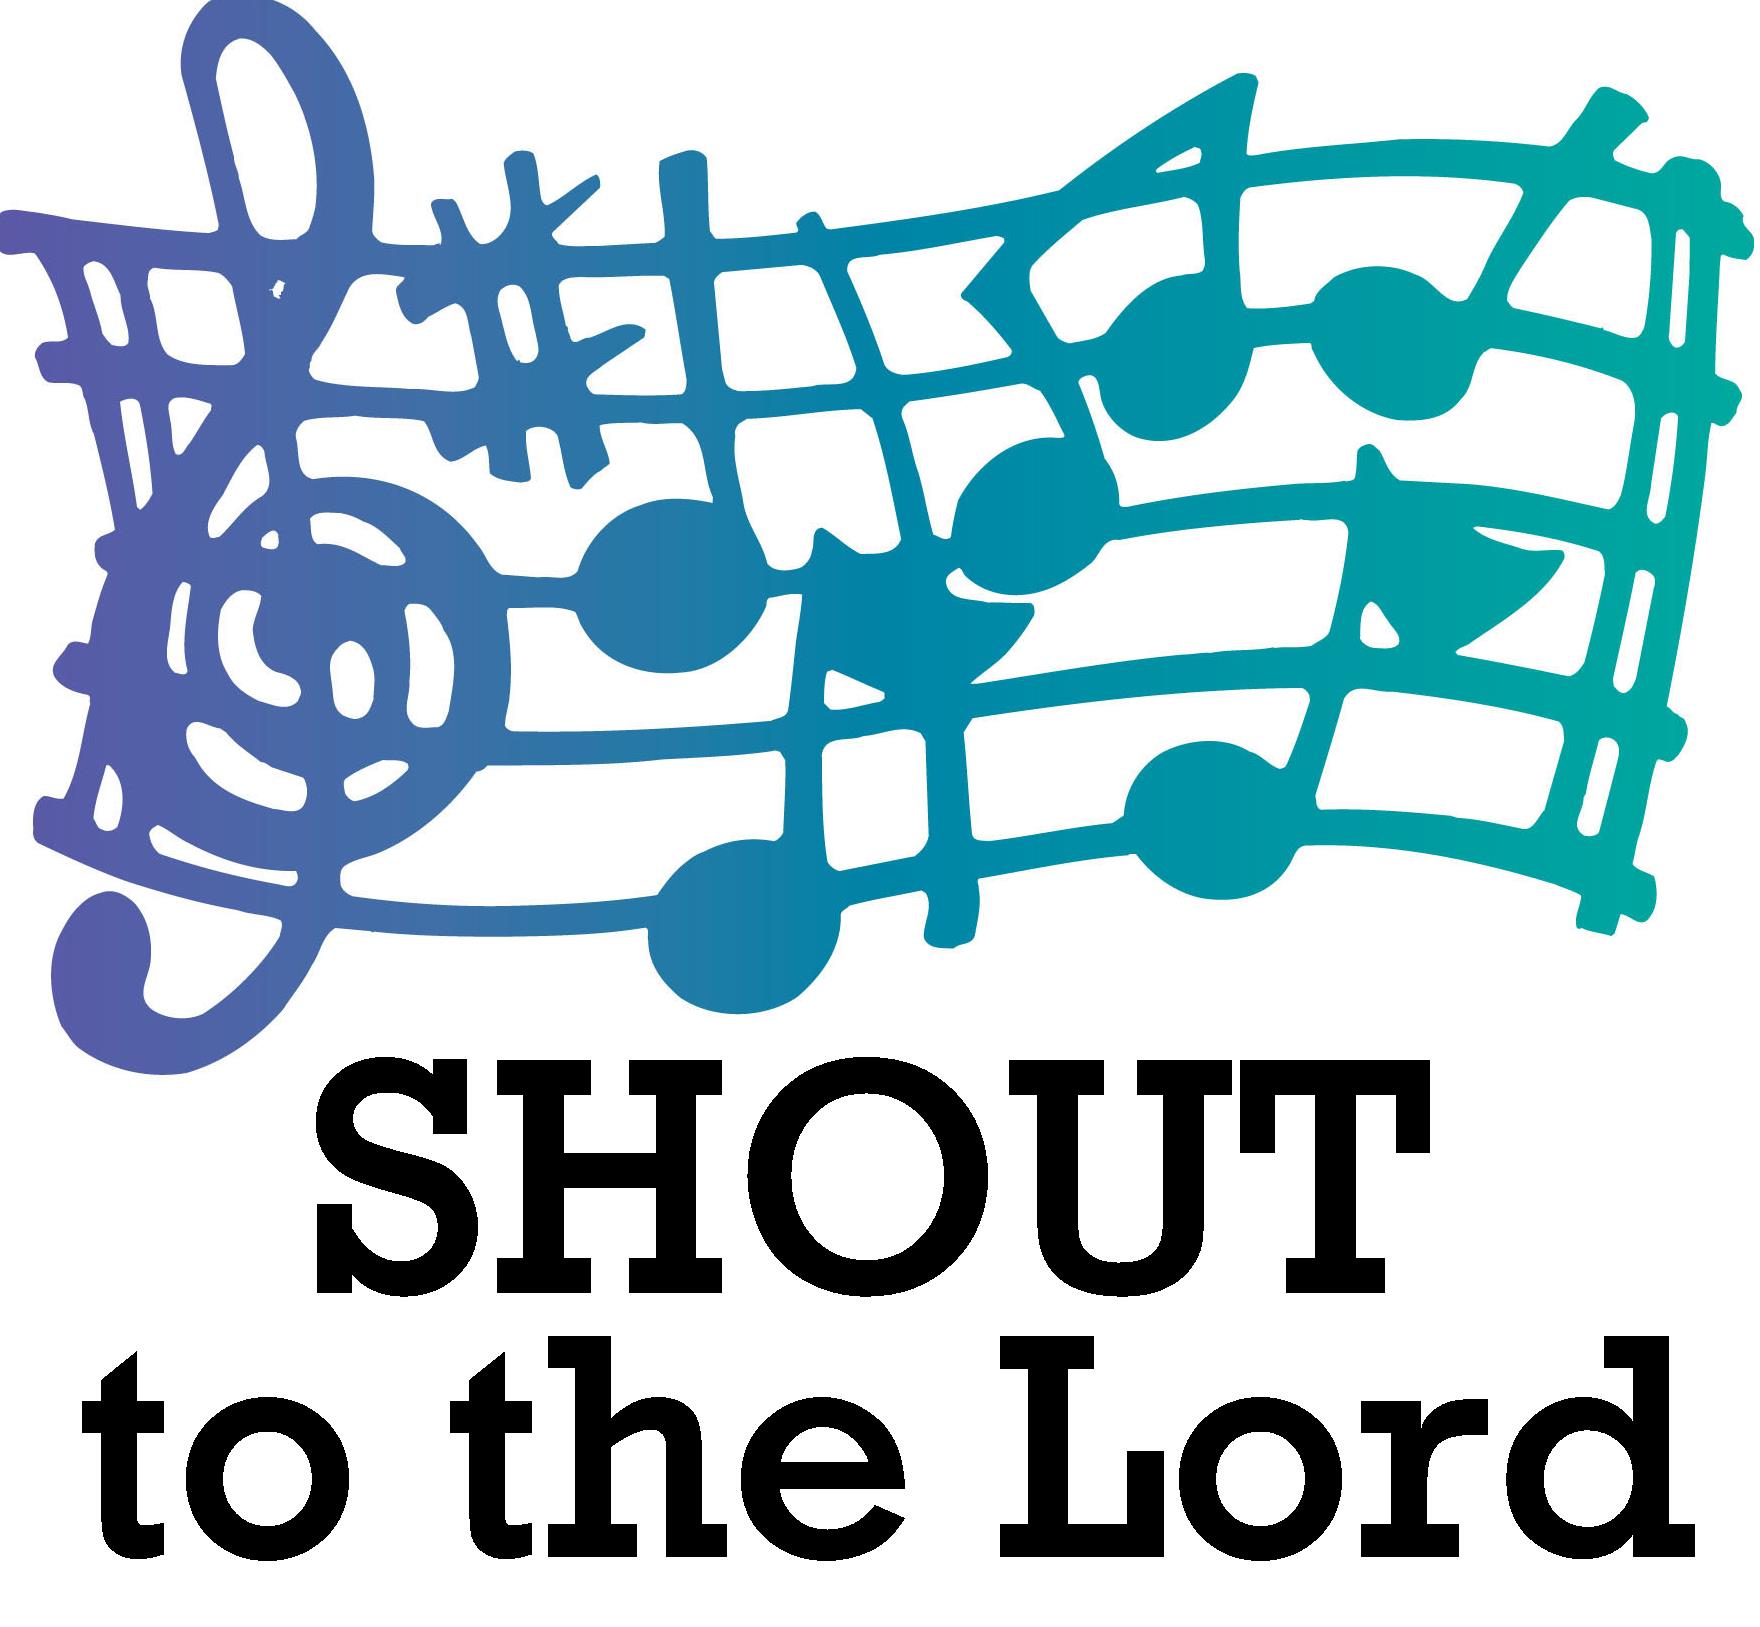 who sings shout it out